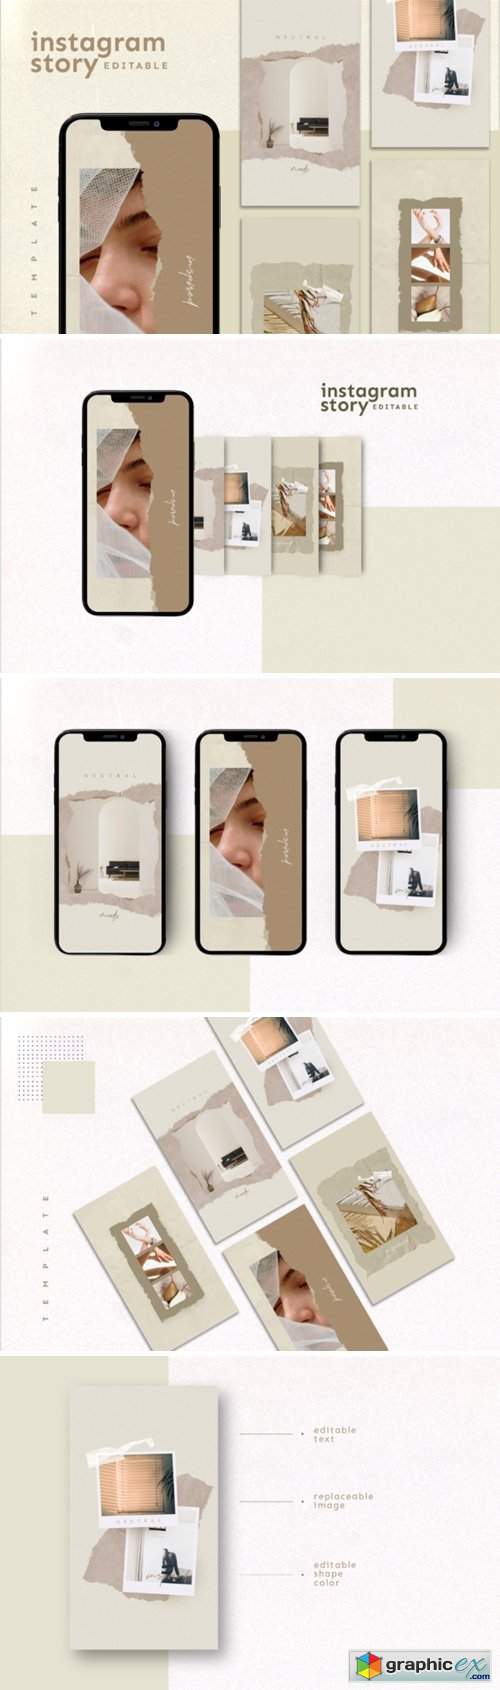  Instagram Story Template 3783654 